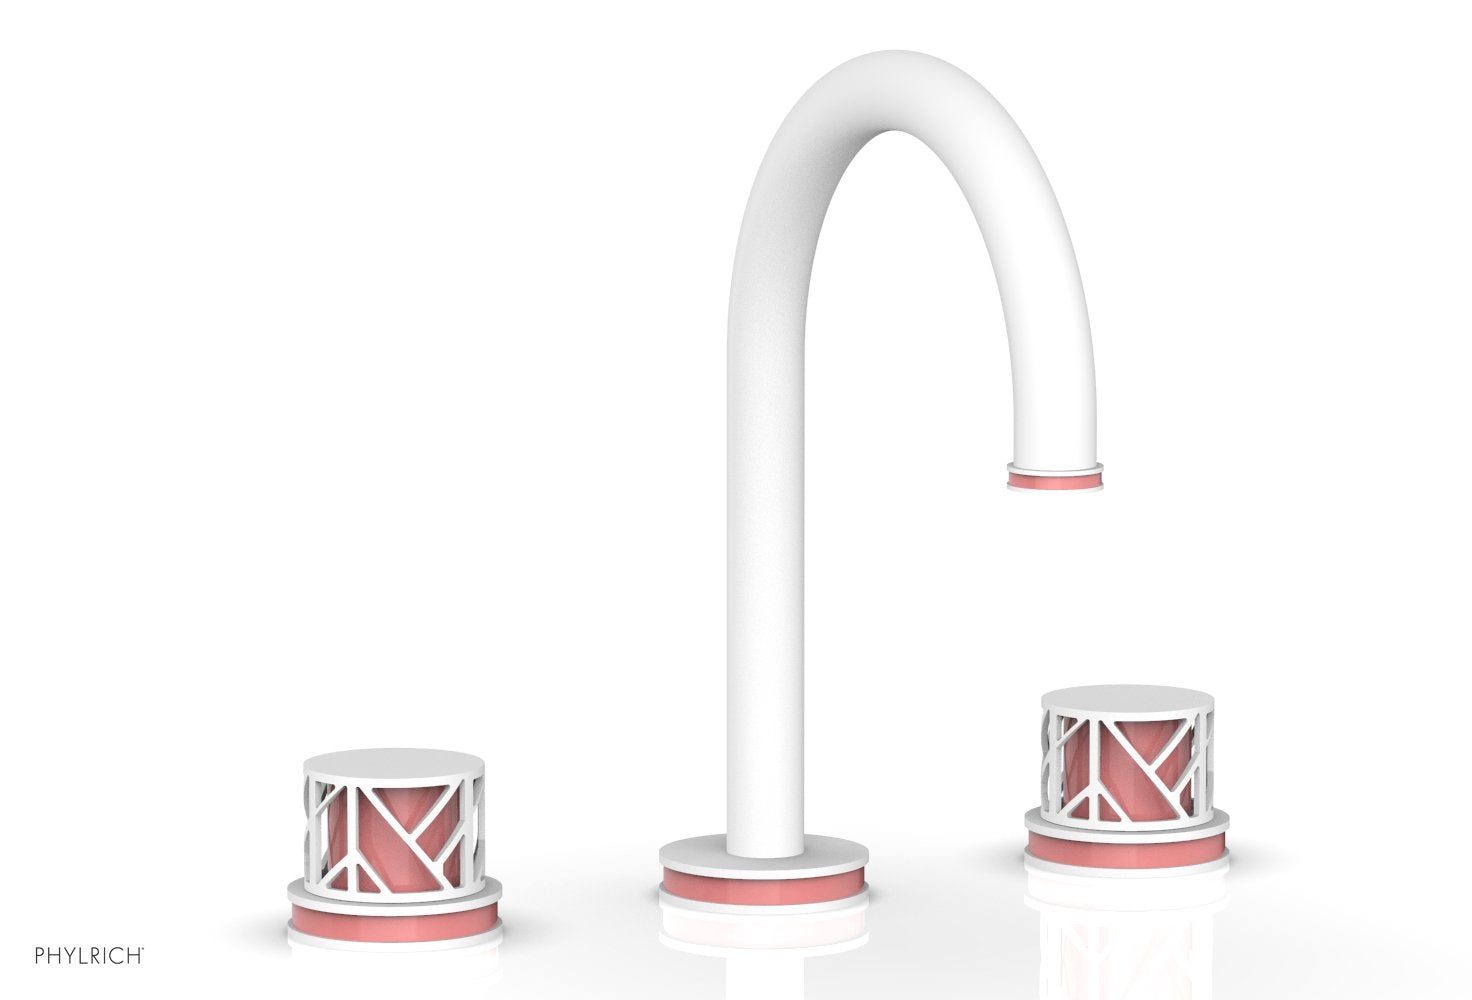 Phylrich JOLIE Widespread Faucet - Round Handles with "Pink" Accents